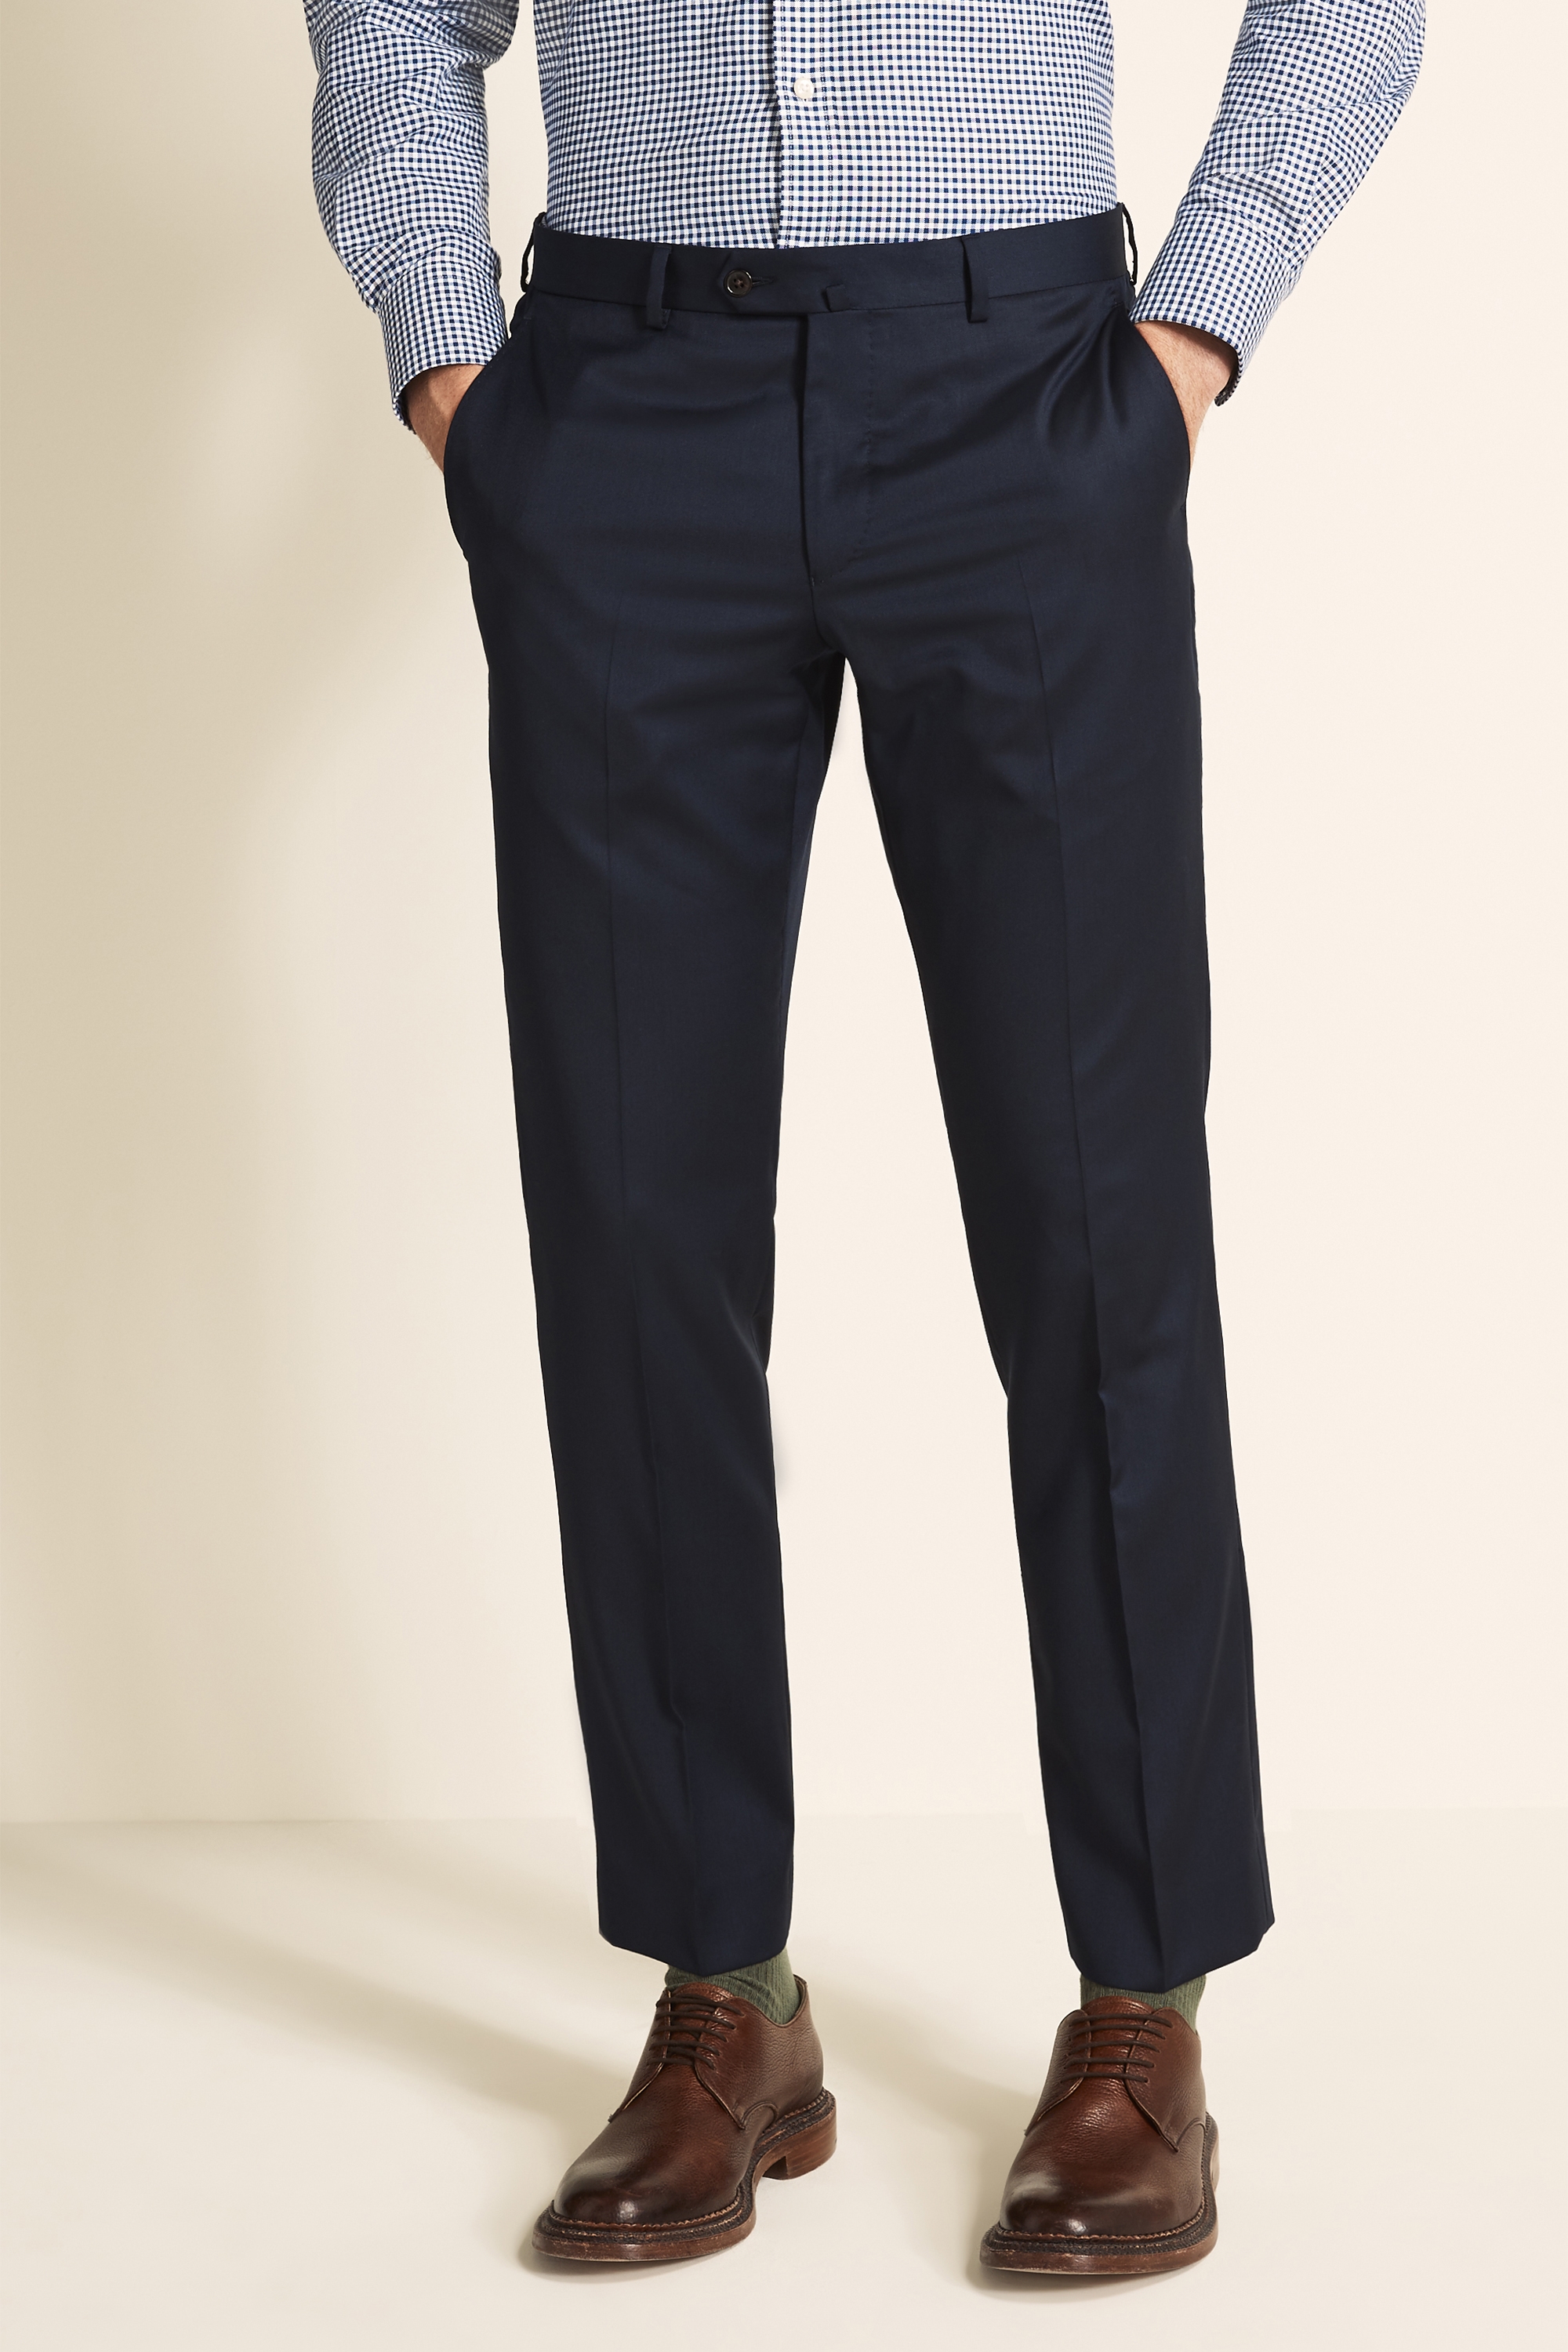 Savoy Taylors Guild Tailored Fit Navy Twill Trousers